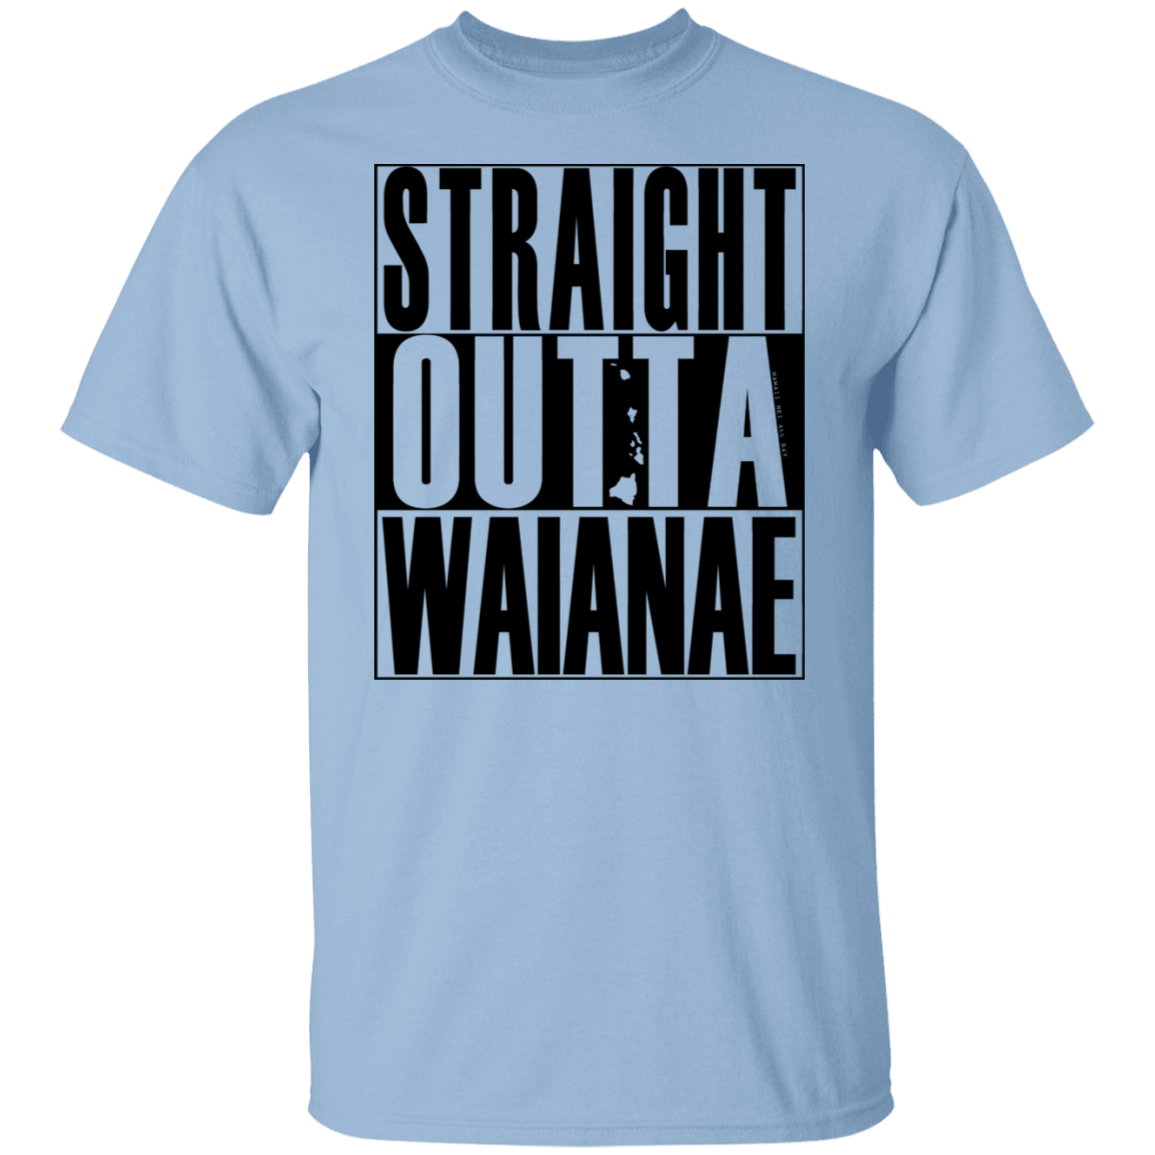 Straight Outta Waianae (black ink) T-Shirt